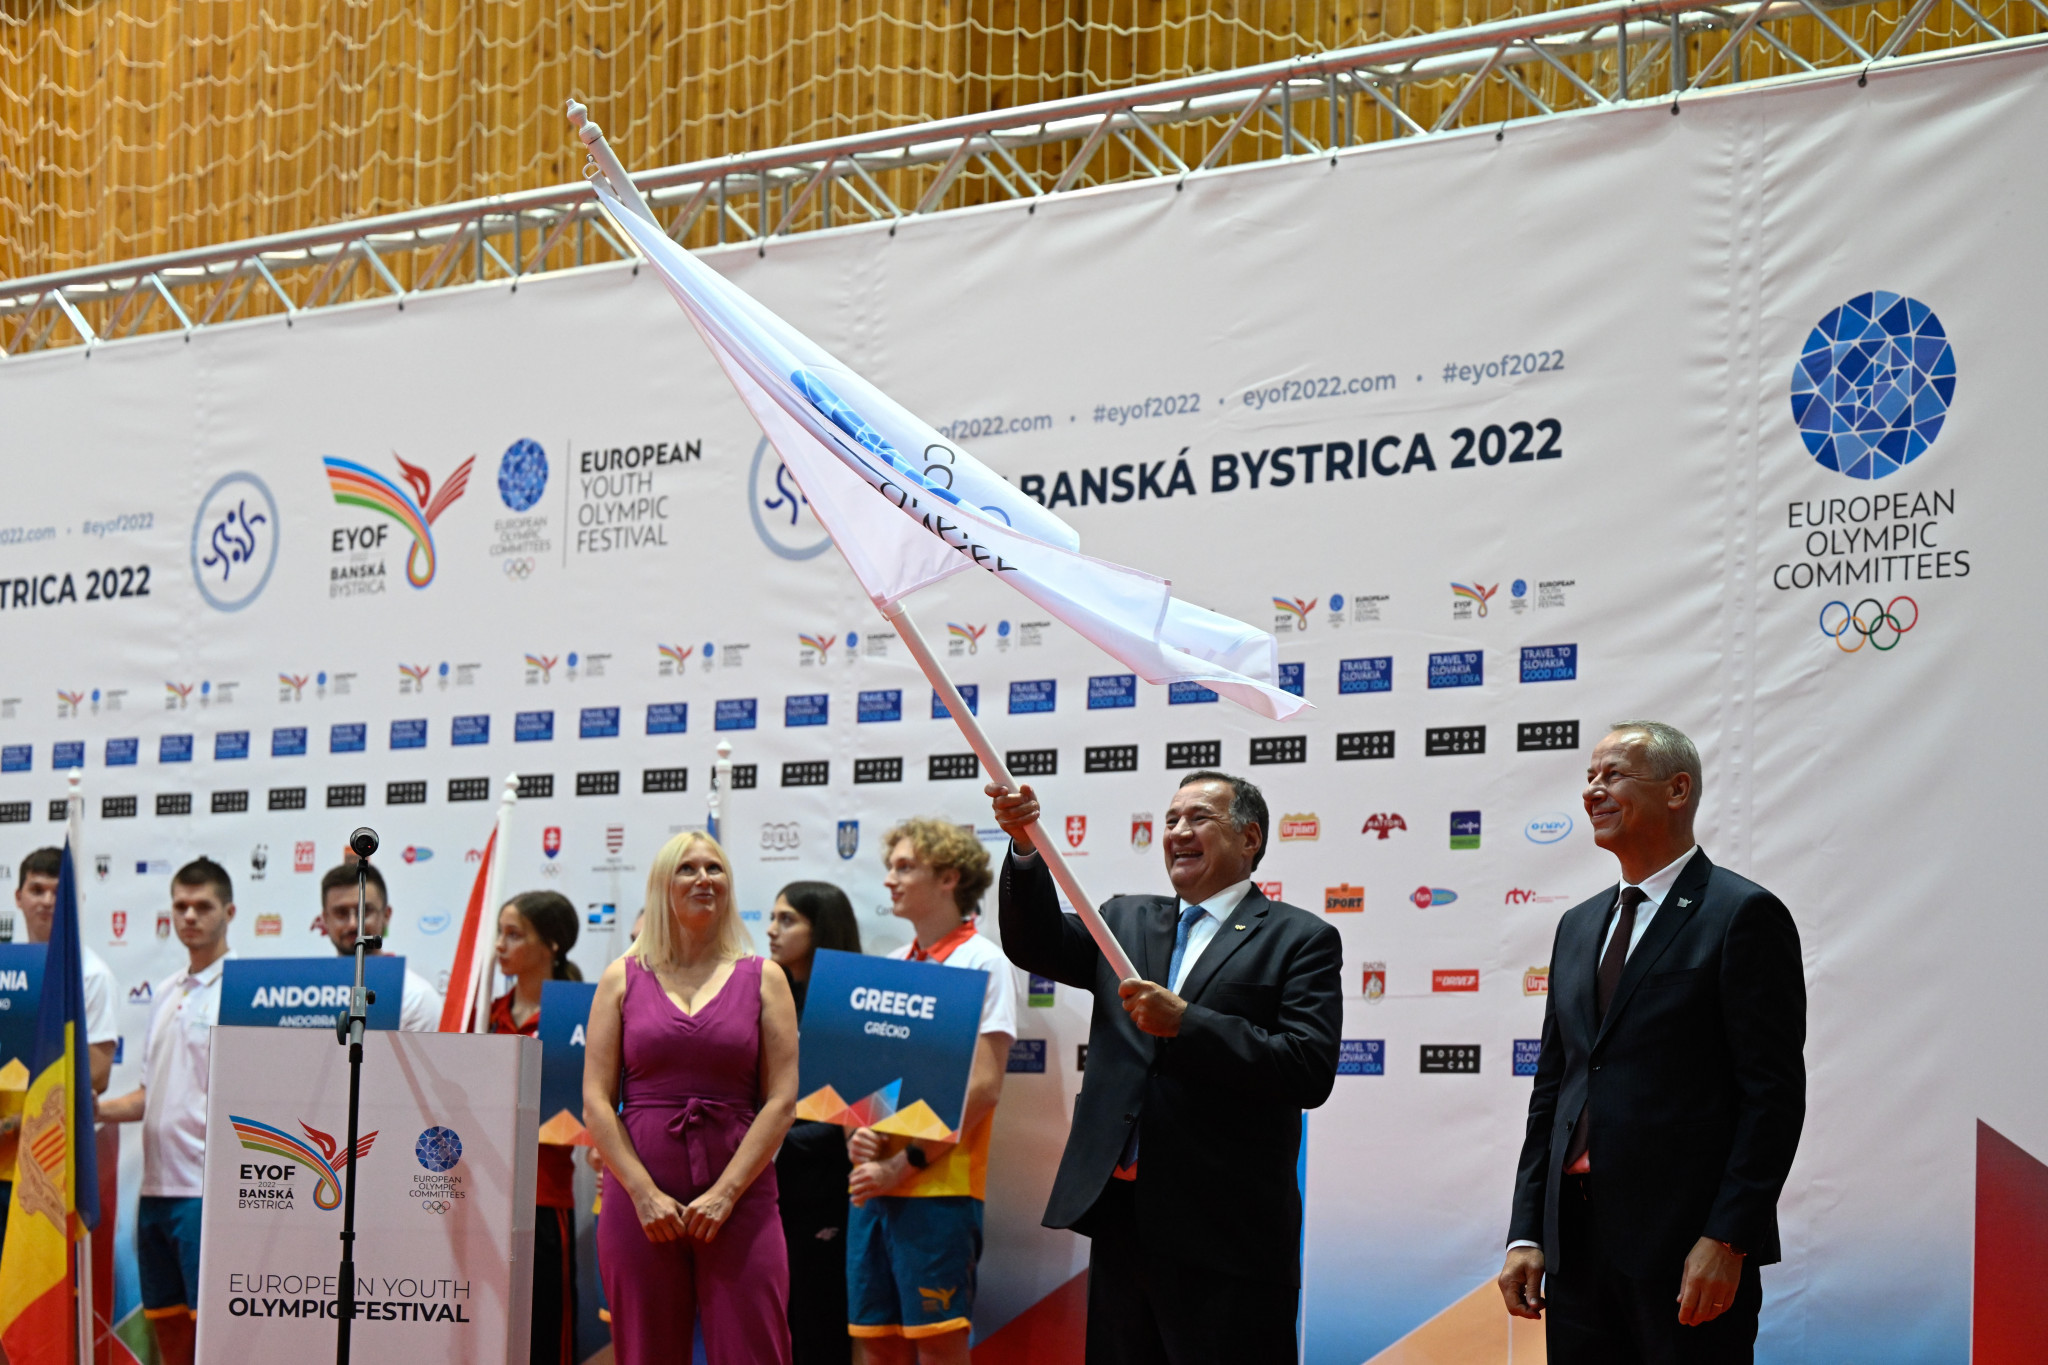 EOC President Spyros Capralos thanked the Banská Bystrica Organising Committee before officially declaring the EYOF closed ©EYOF Banská Bystrica 2022